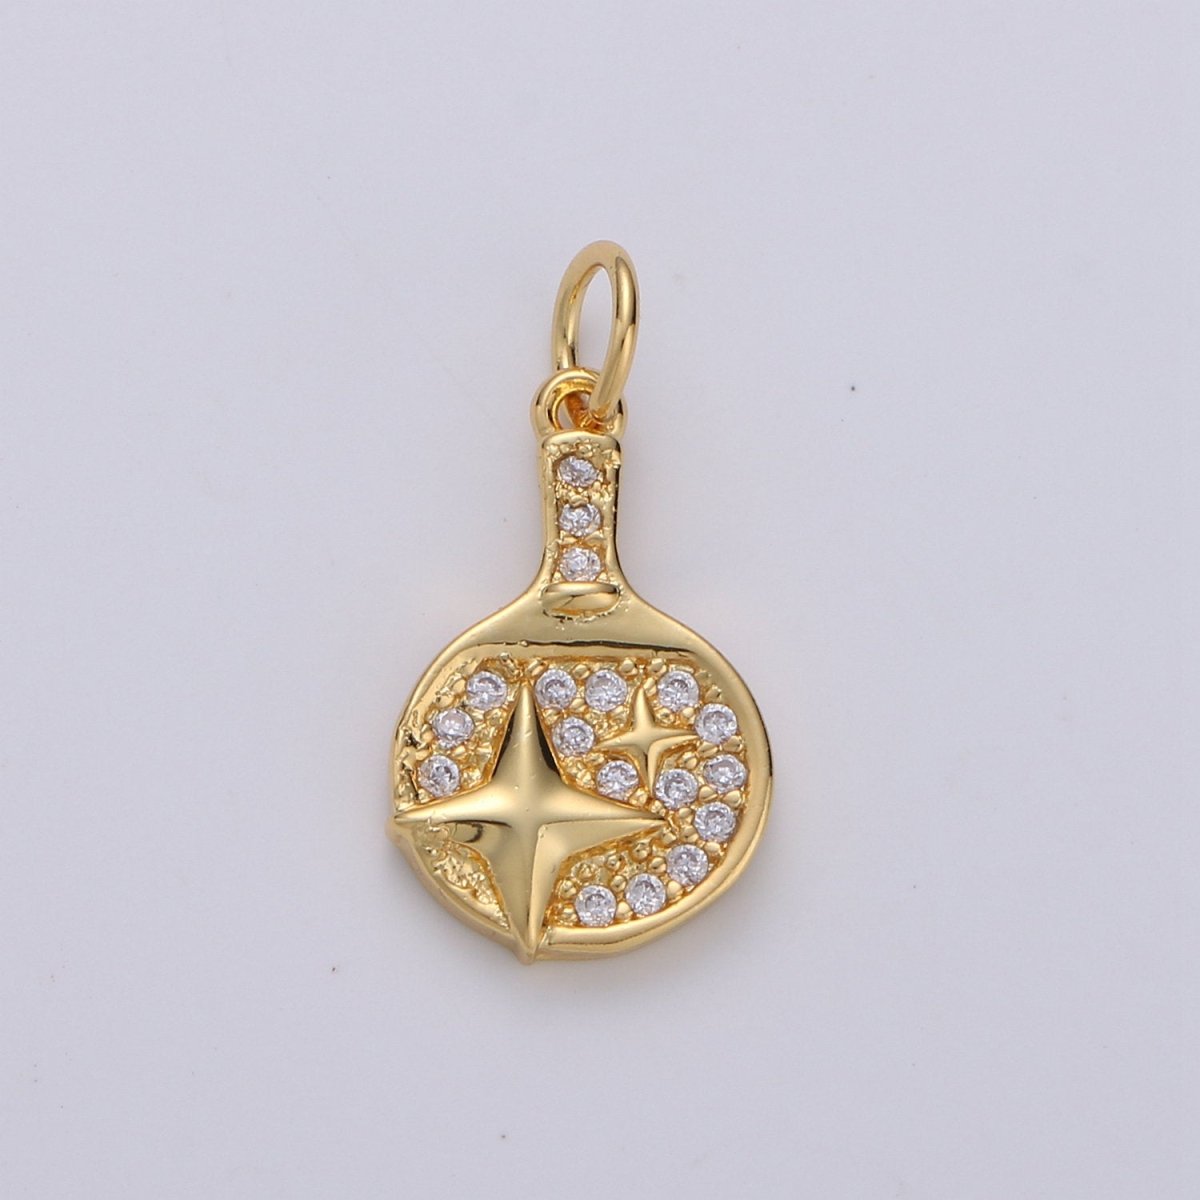 Dainty Gold Cubic North Star charm, CZ, Brass, Nickel free, Star pendant, Necklace supplies, Jewelry makings for Bracelet Earring Component D-281 D-282 - DLUXCA